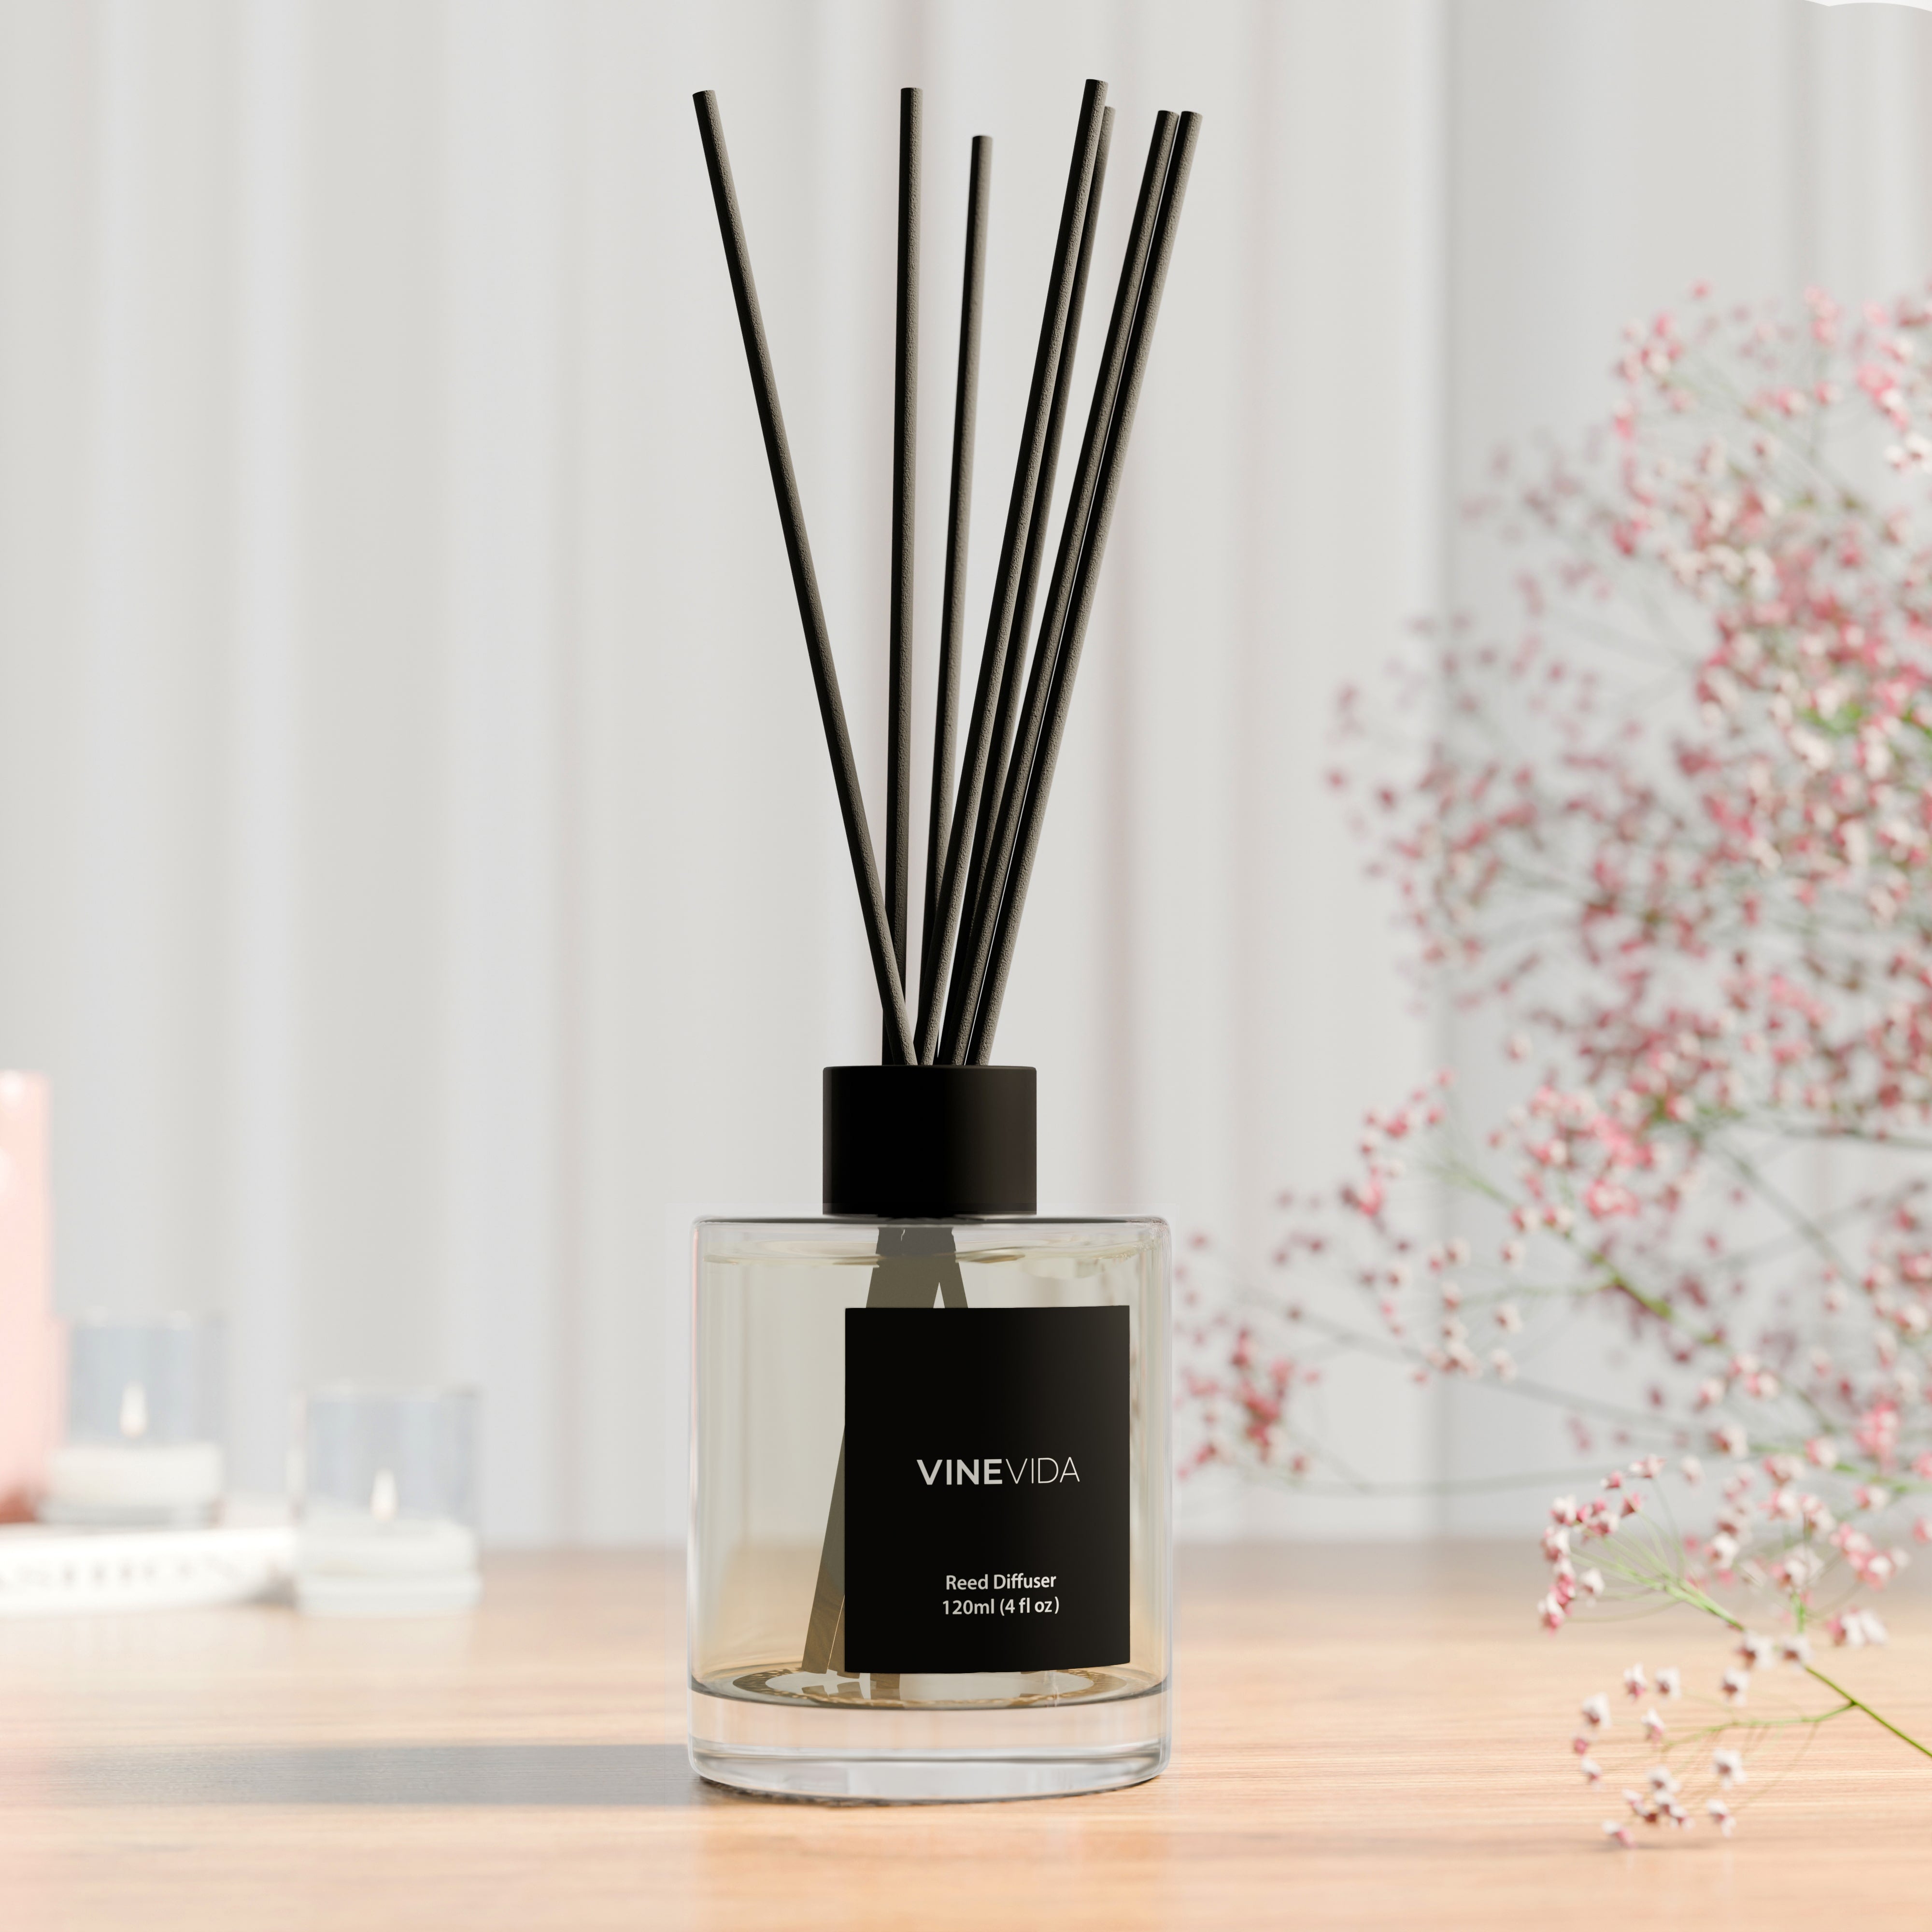 NO. 1119 Reed Diffuser - Inspired by: Vanilla Pumpkin Marshmallow by Bath & Body Works